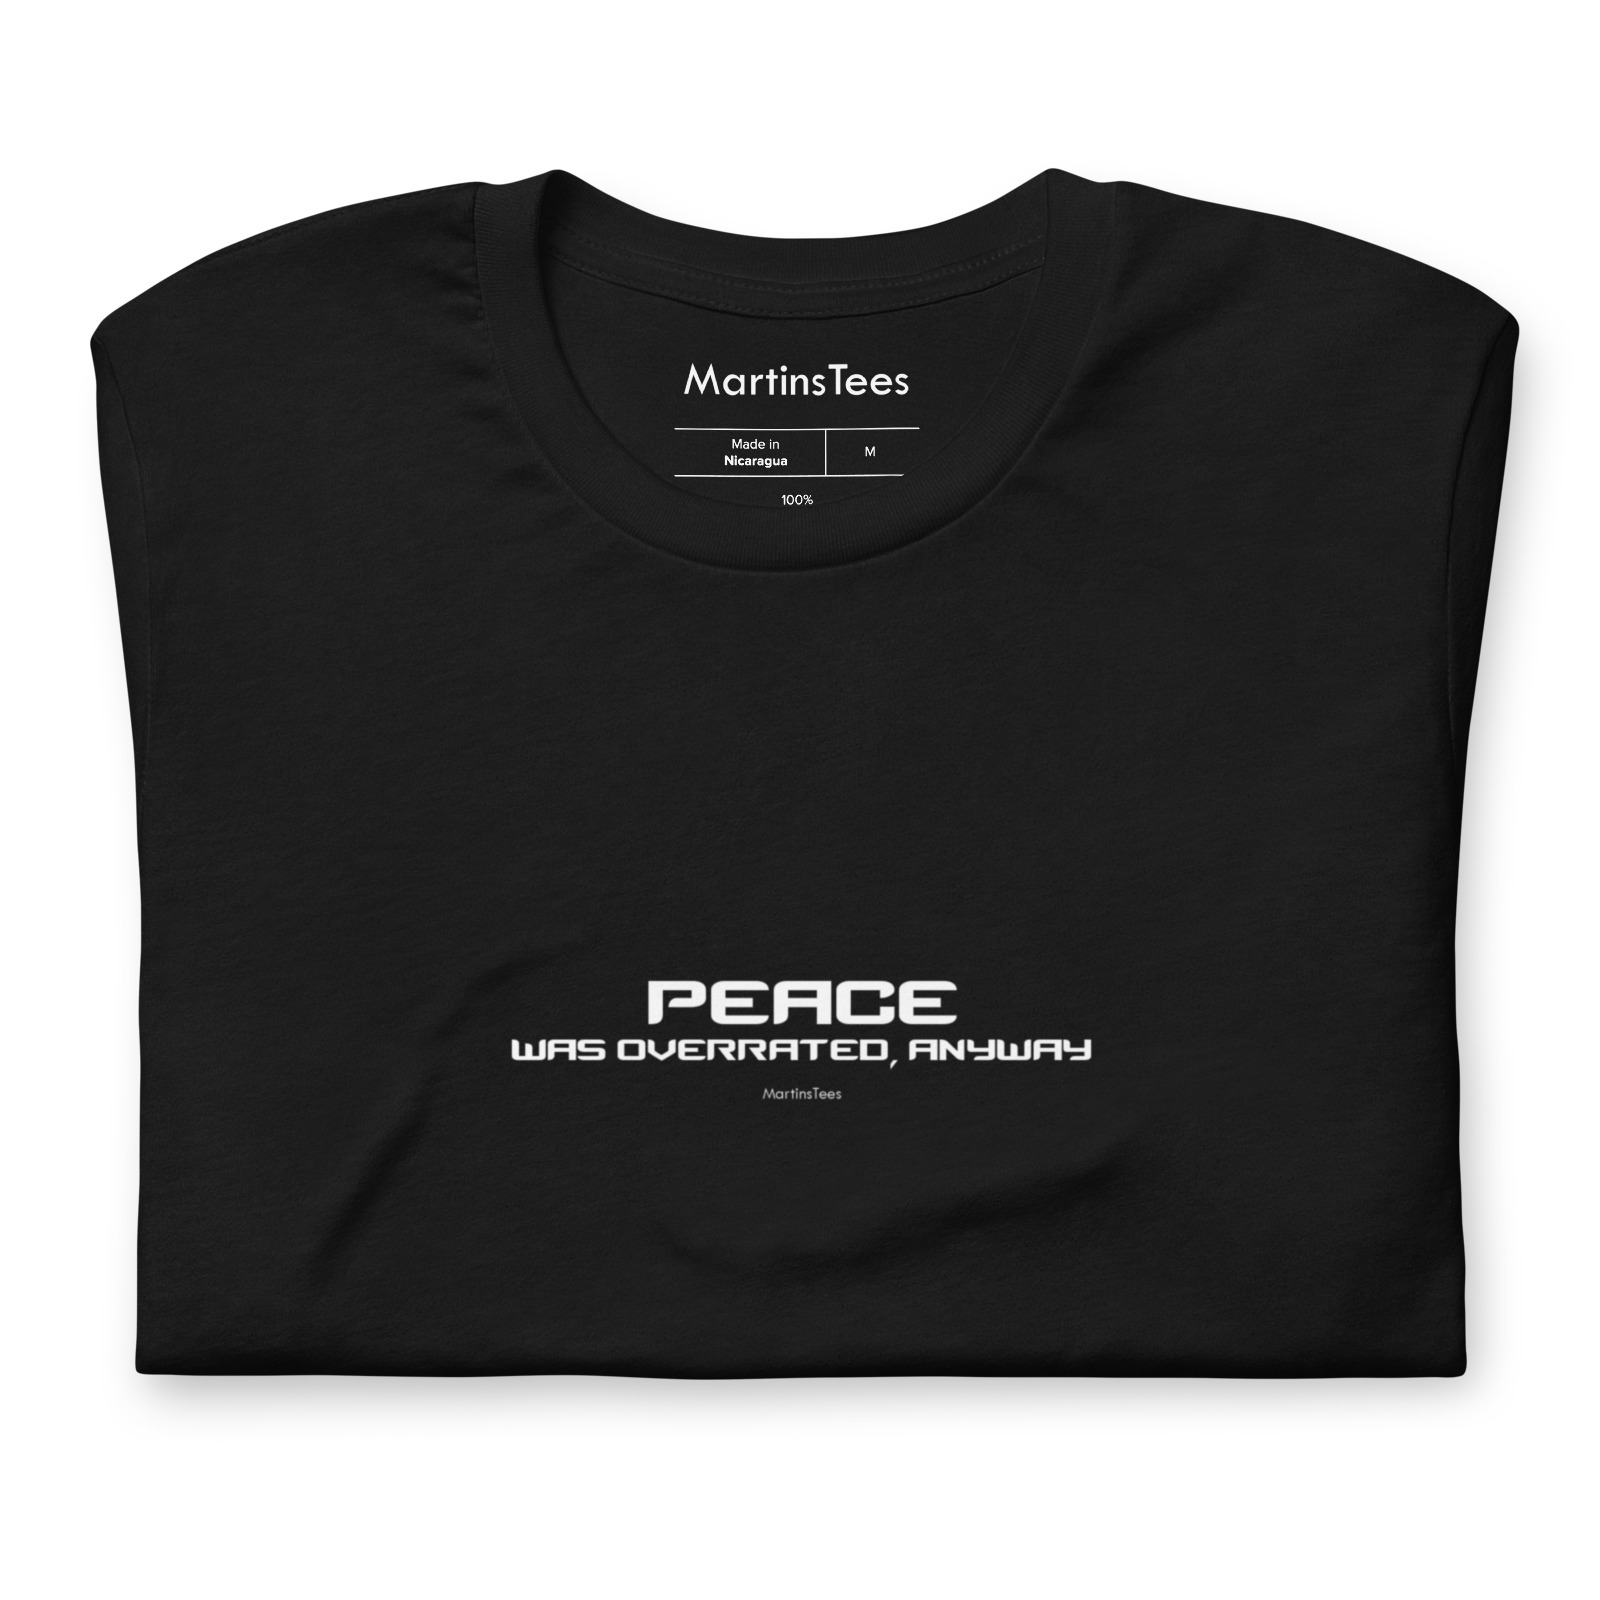 T-shirt: PEACE - WAS OVERRATED, ANYWAY